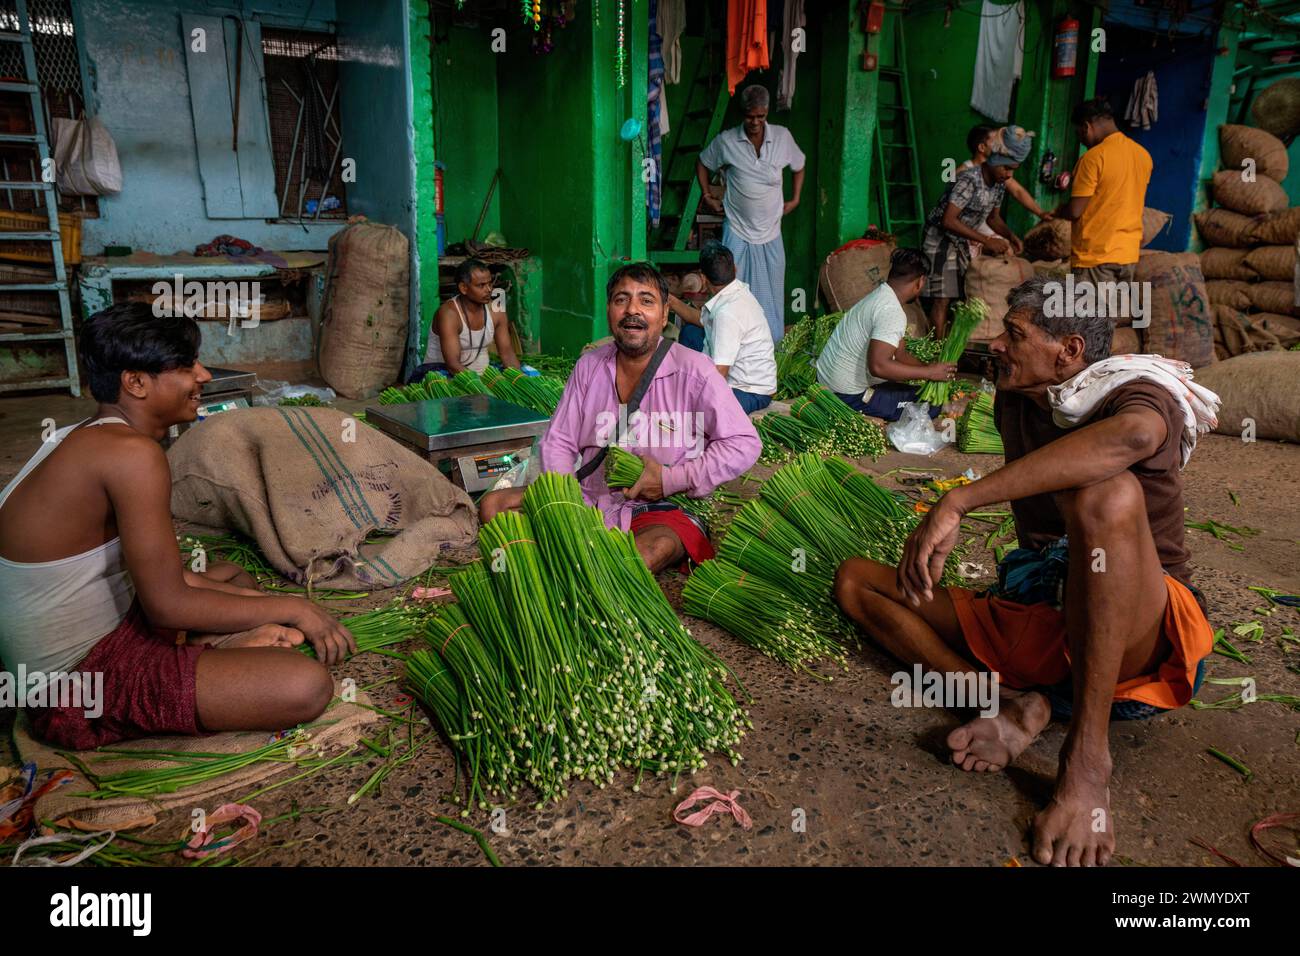 India, Bengal, Calcutta, the wholesale fruit and vegetable market Stock Photo